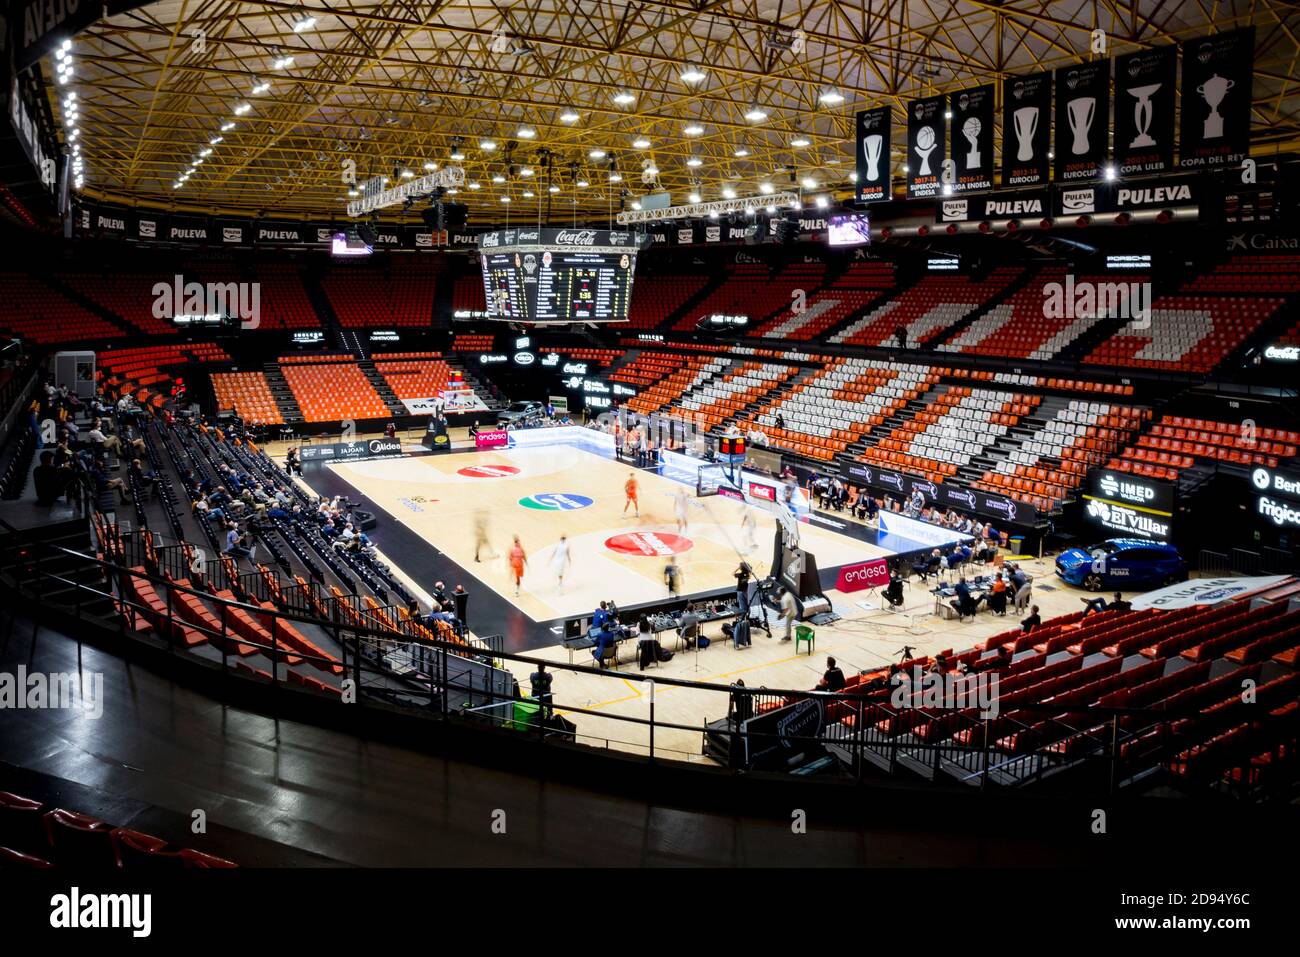 View of the Pabellon Fuente San Luis during the Spanish basketball league (Liga Endesa) match between Valencia Basket and Real Madrid in Valencia, Spain.Final score; Valencia Basket 78:86 Real Madrid. Stock Photo